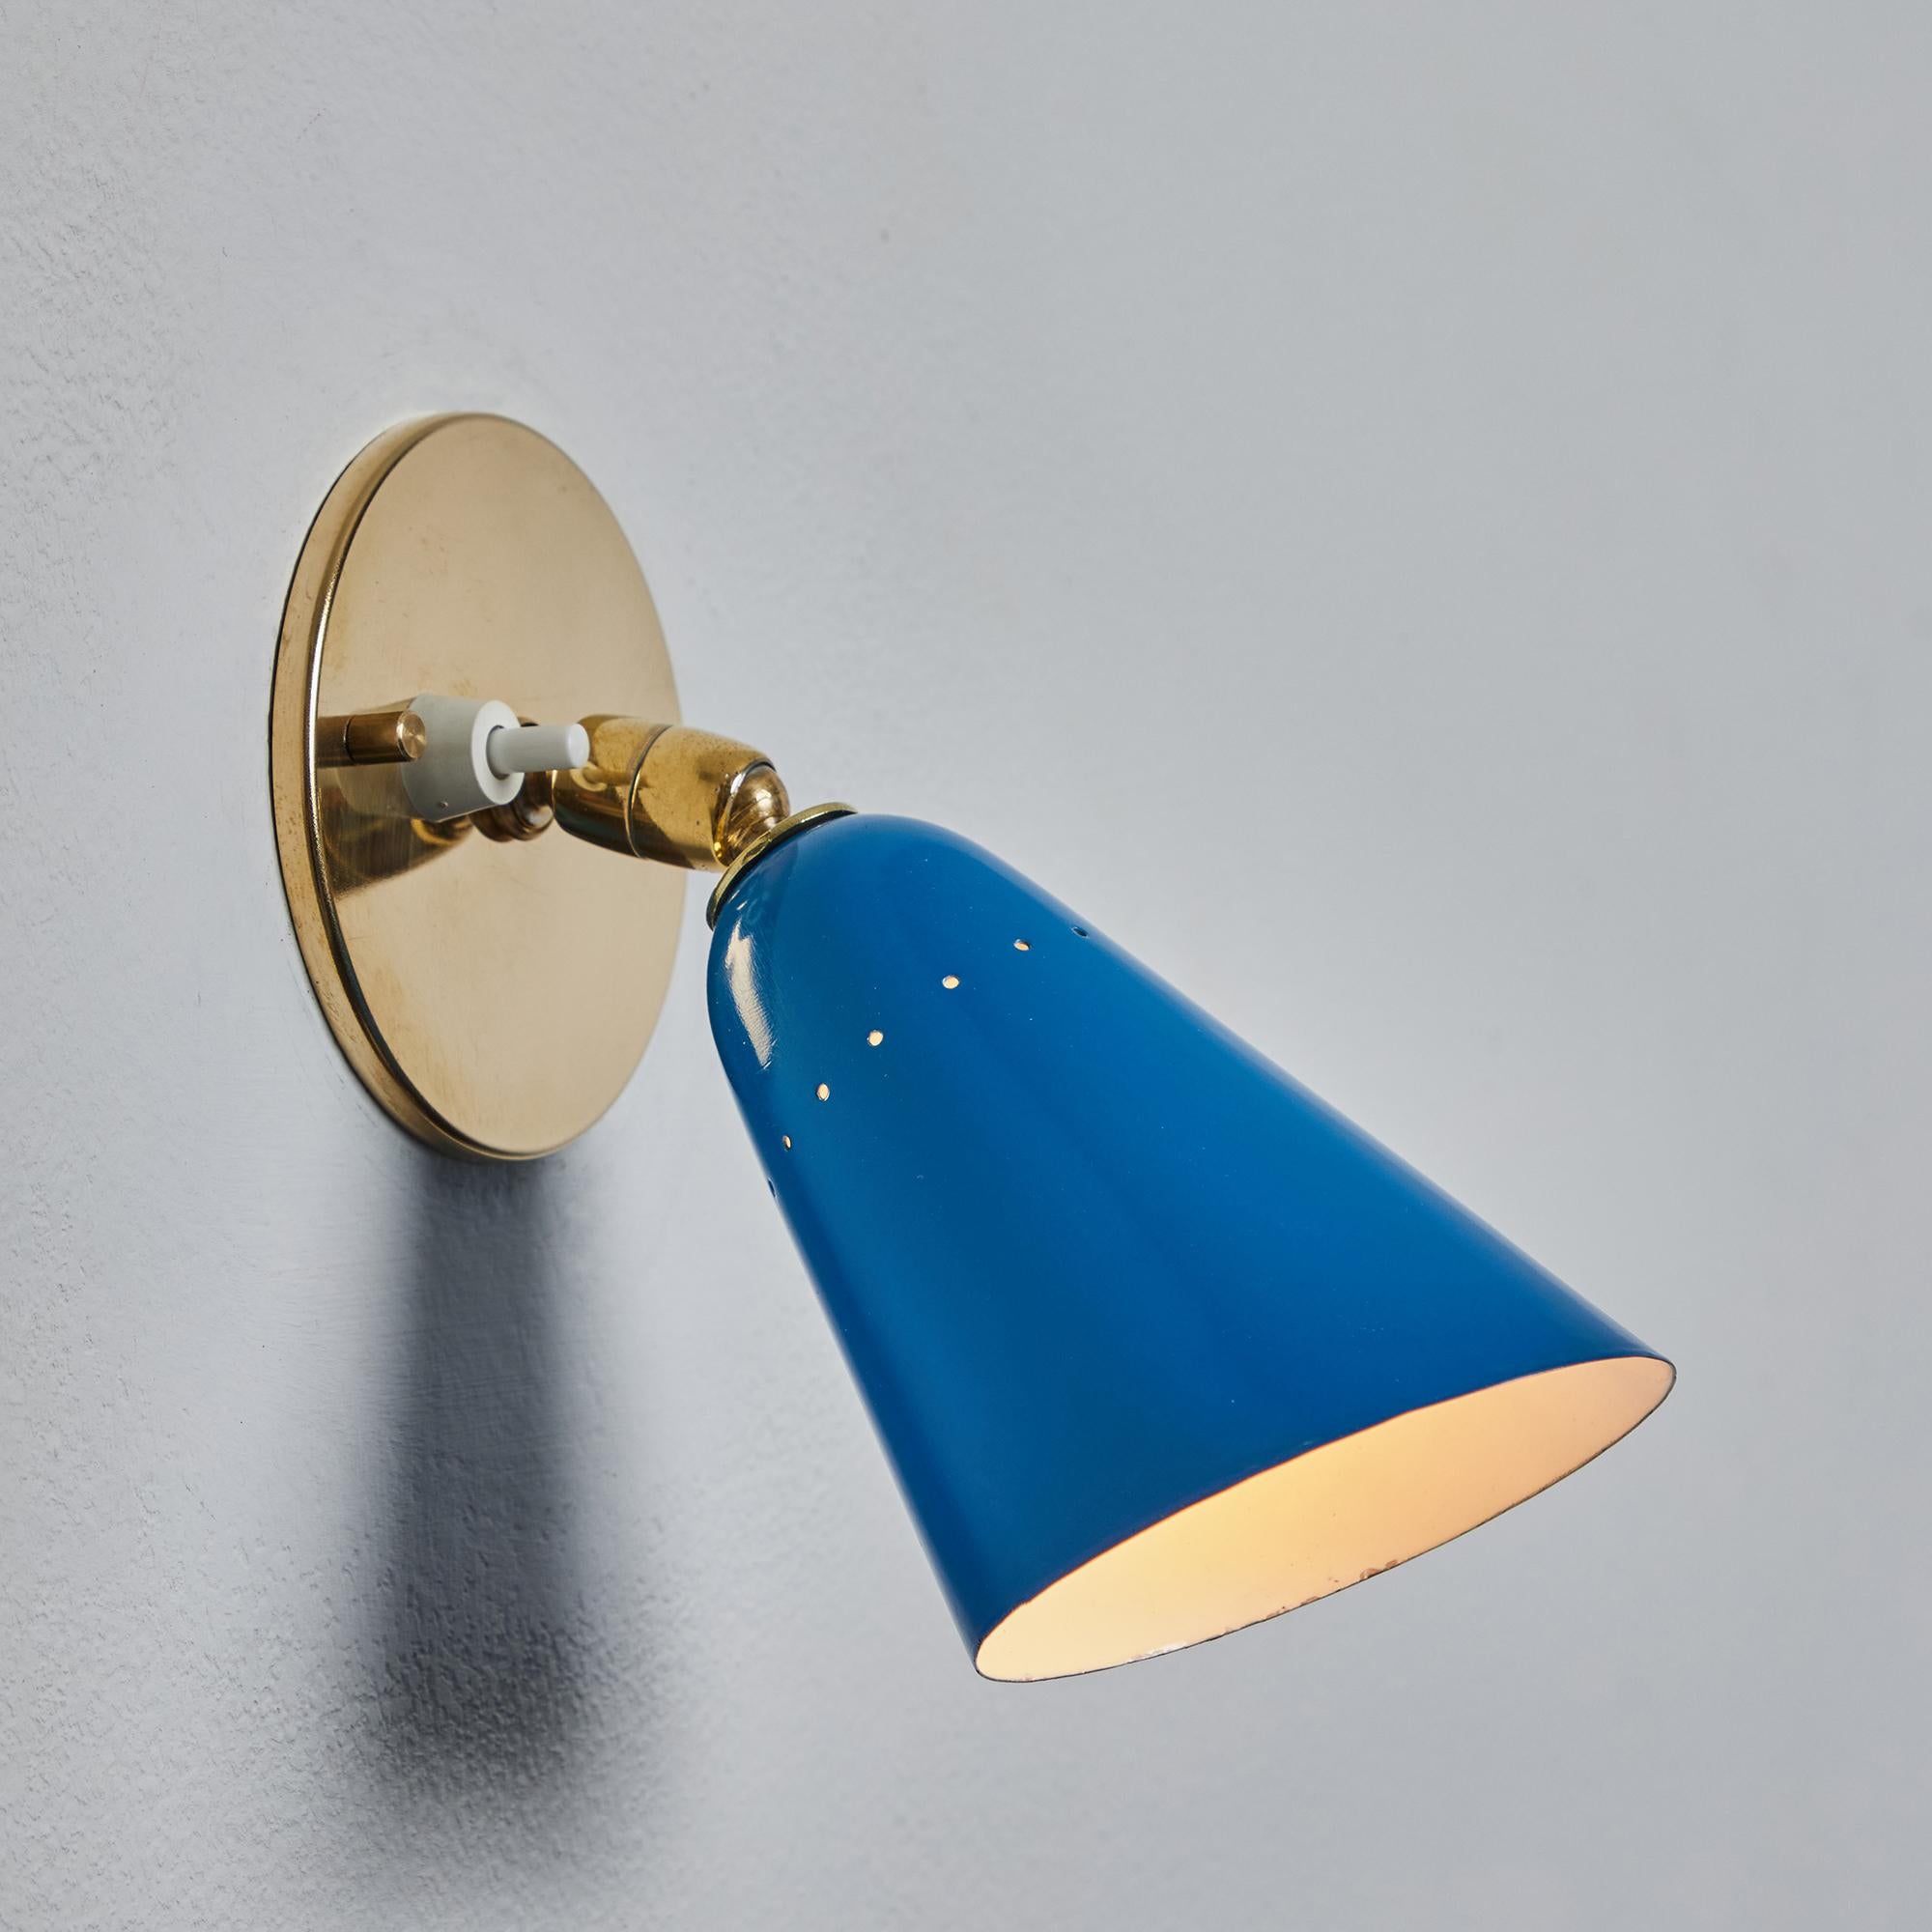 Mid-20th Century 1960s Gino Sarfatti Model #26b Blue and Brass Wall Lamp for Arteluce For Sale